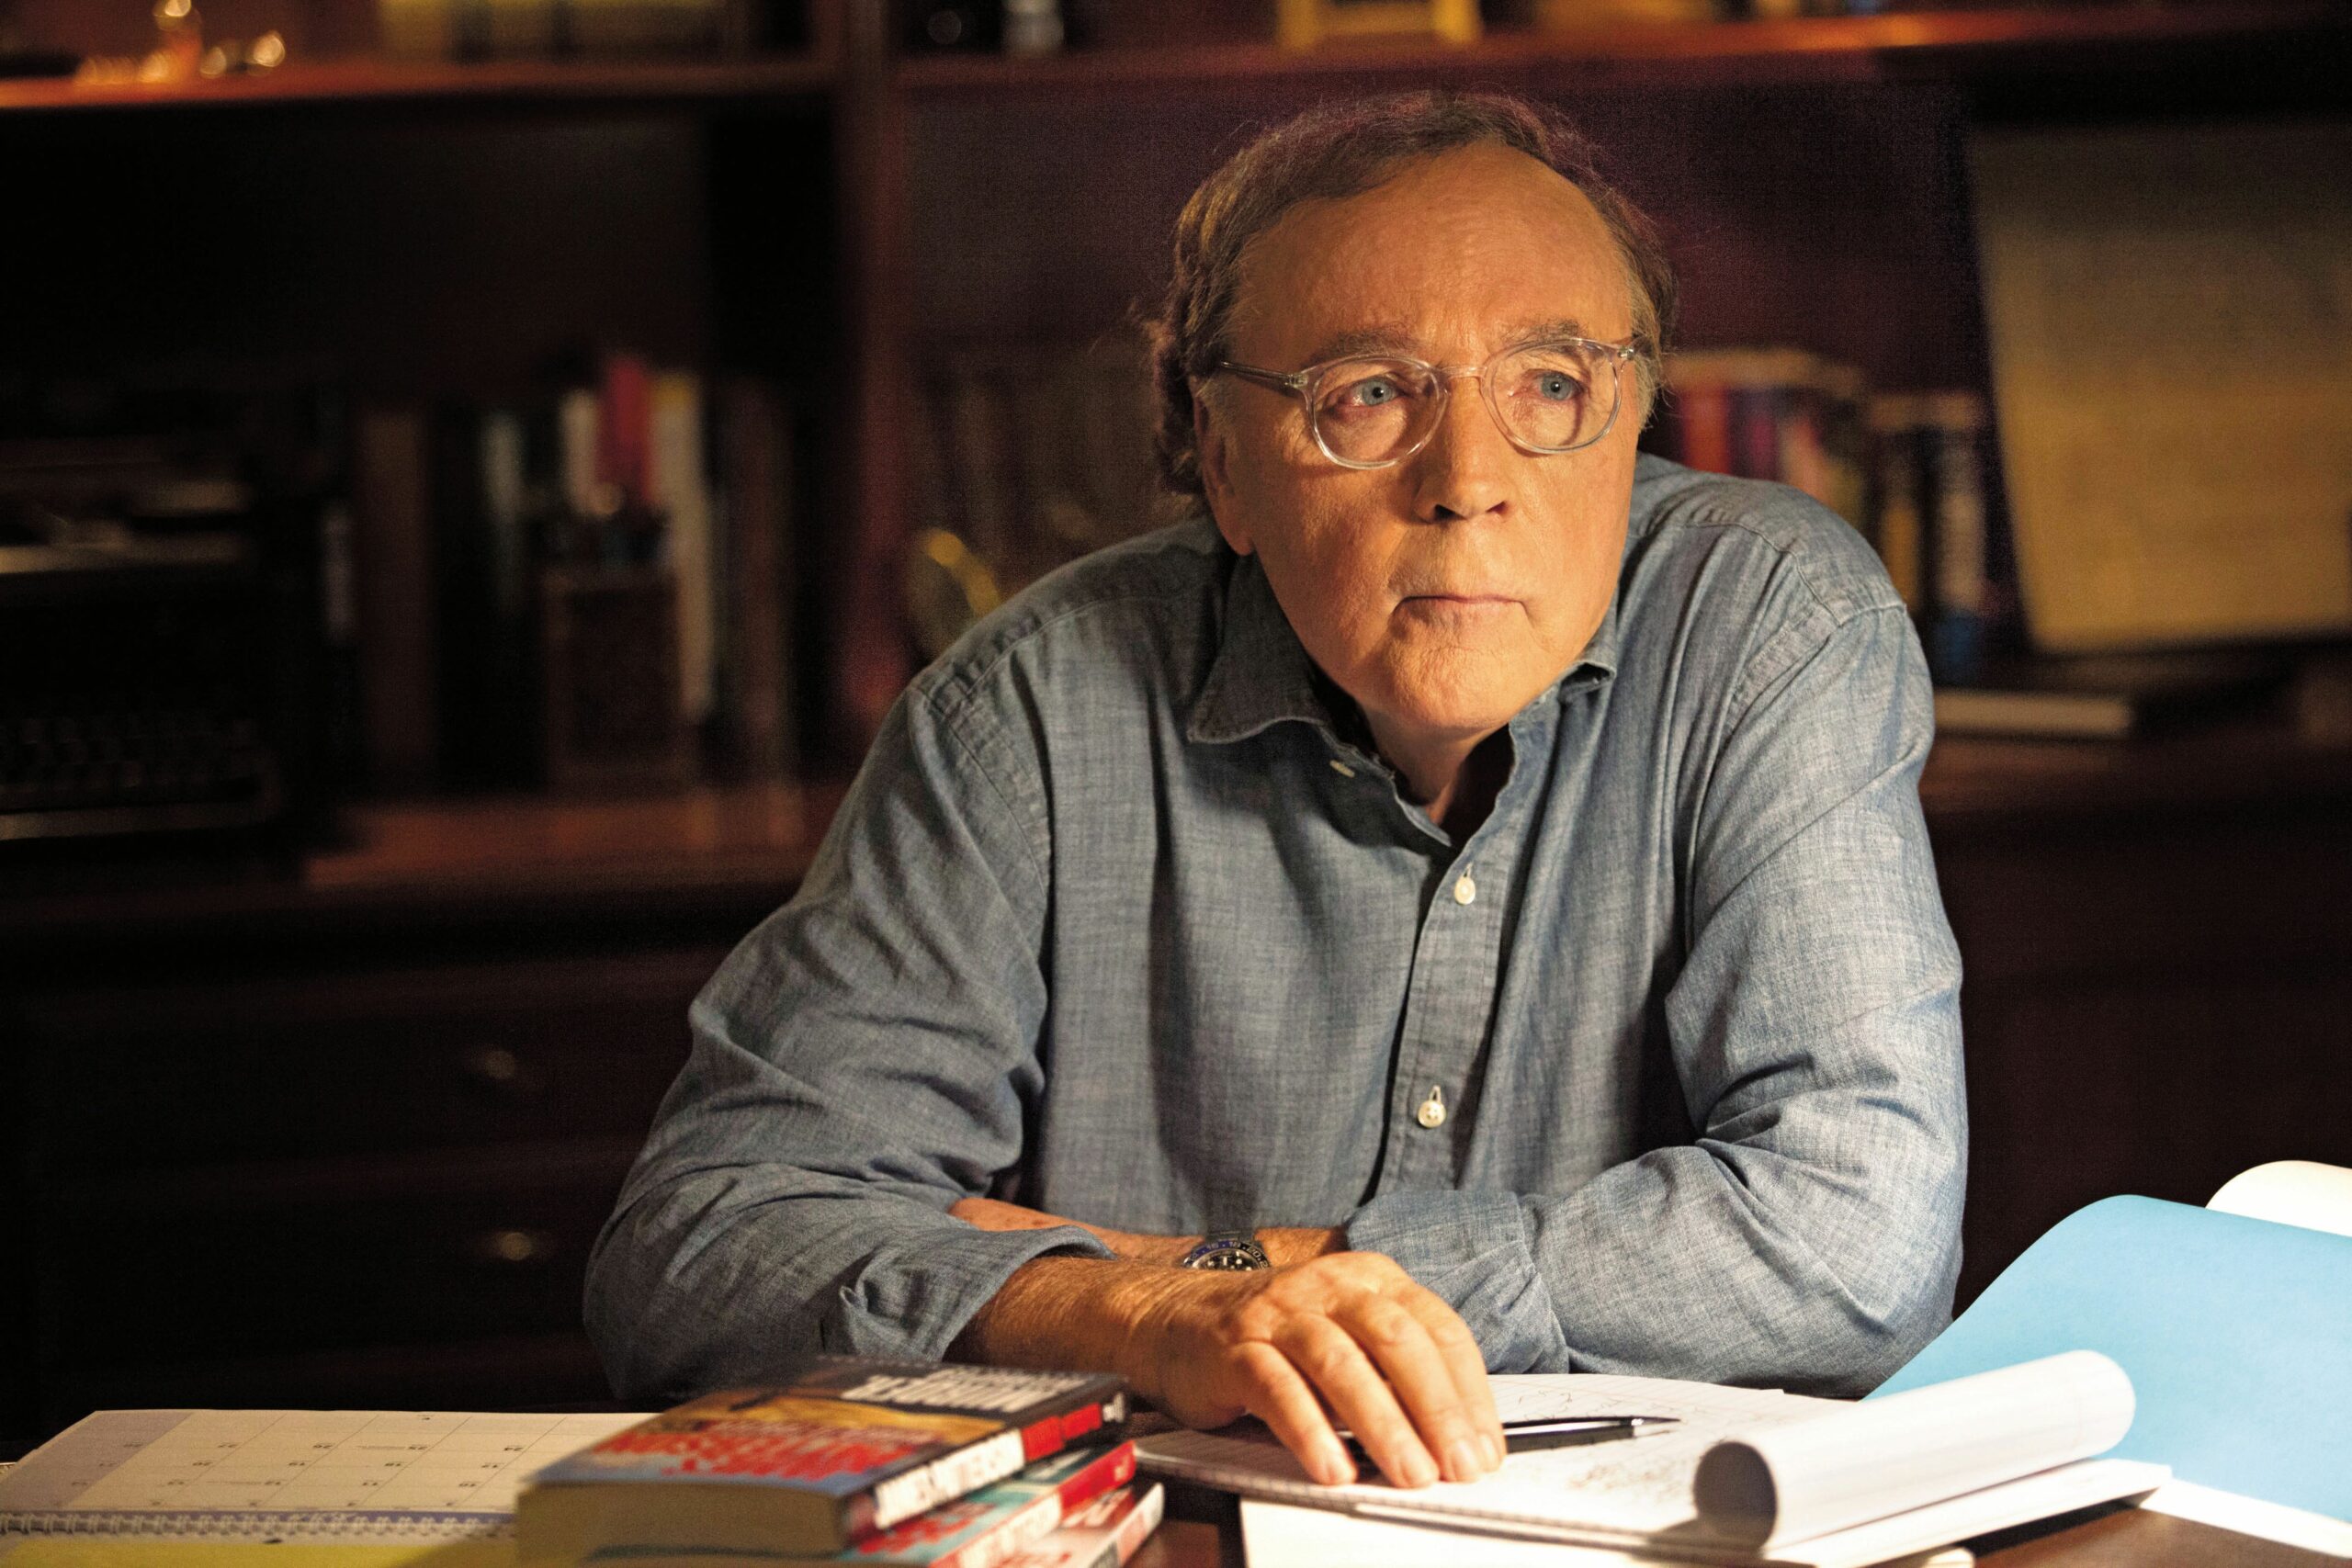 James Patterson: The Master of Heart-Ponding Suspense and Thrills